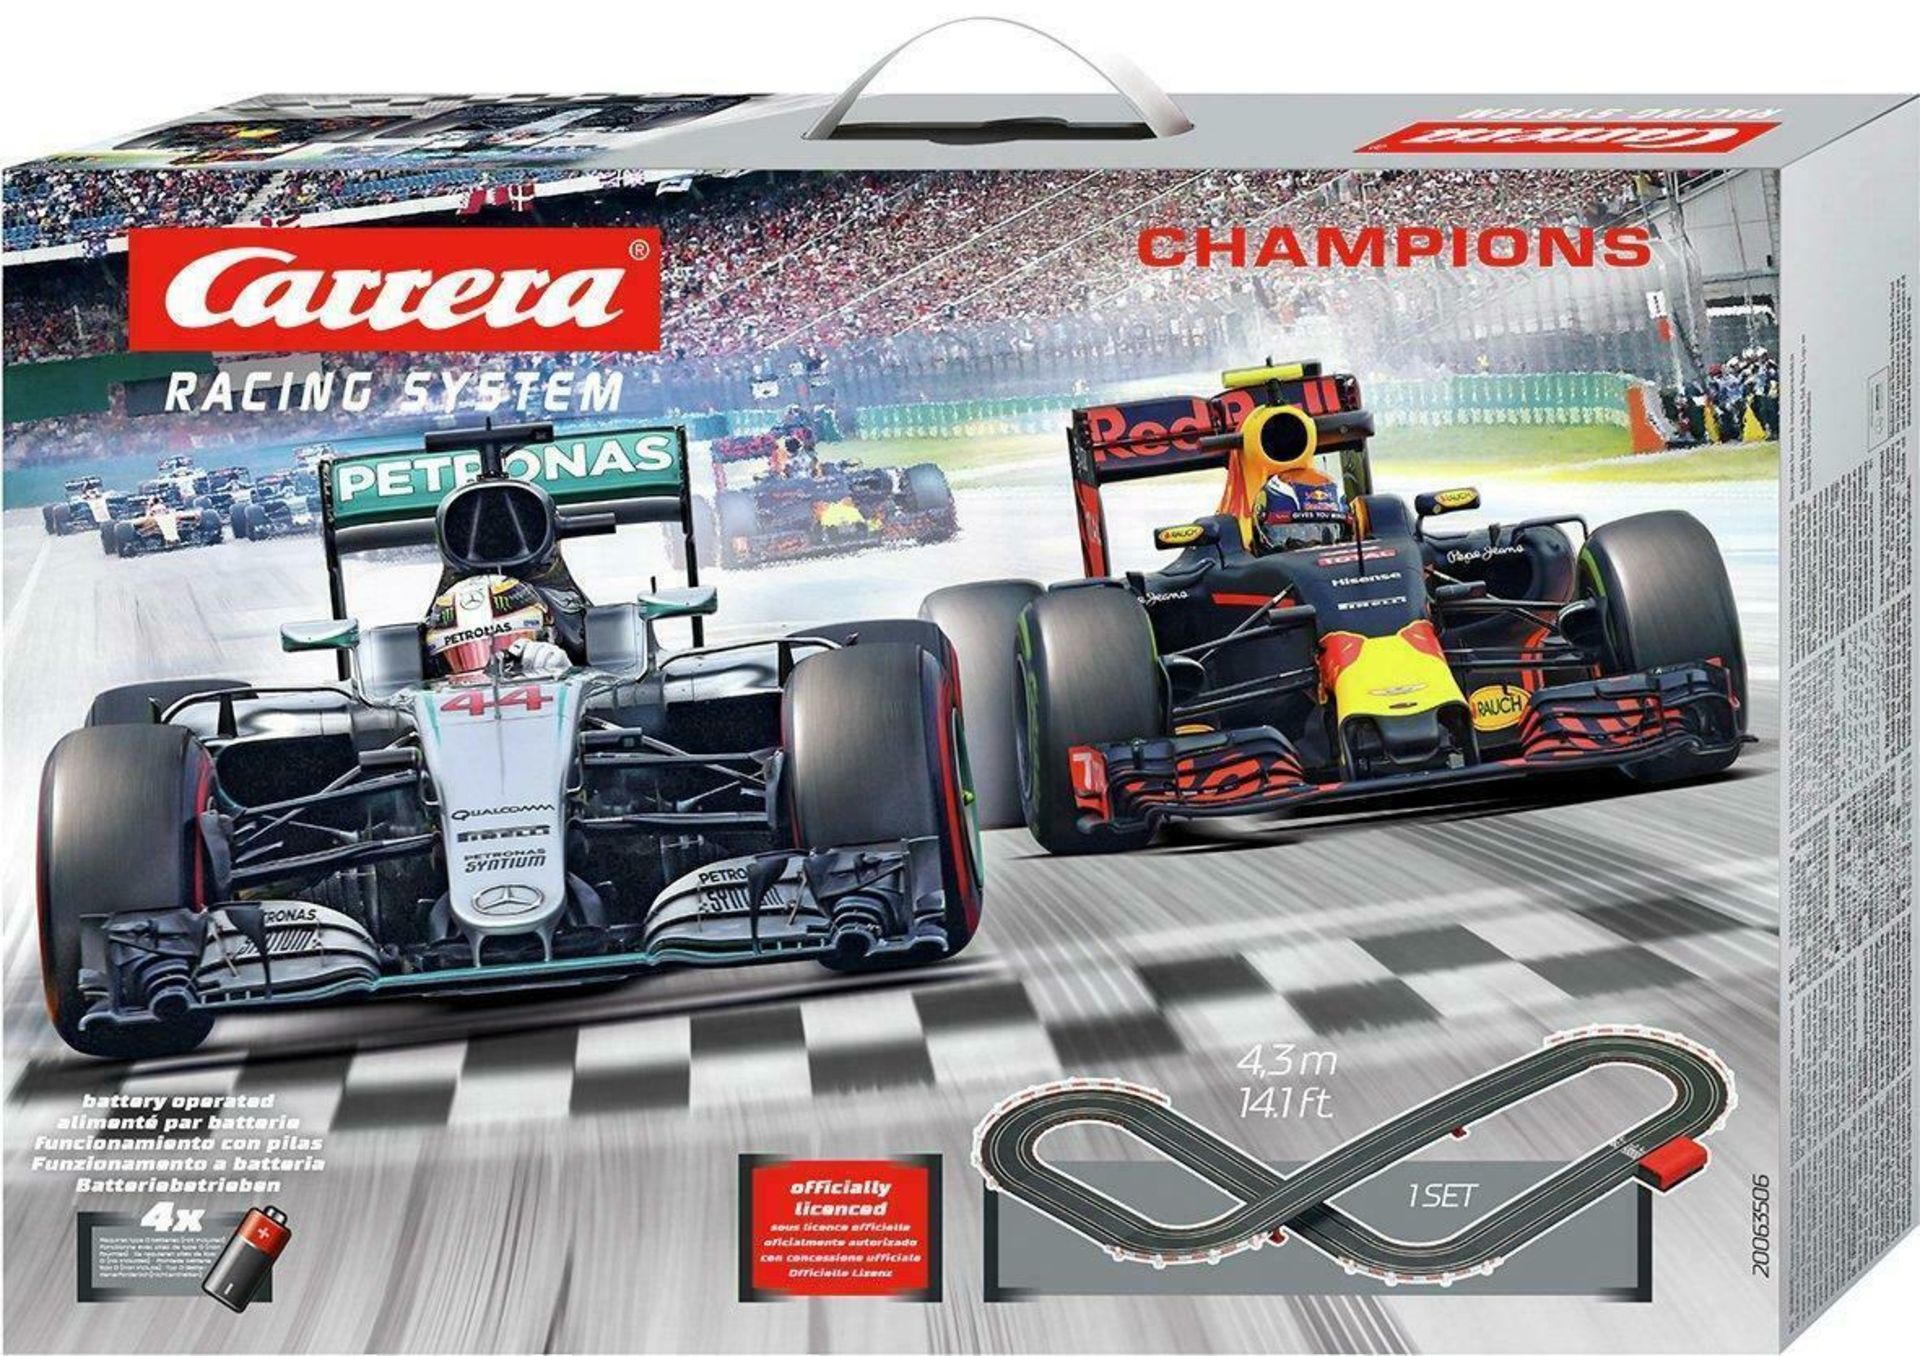 Carrera Mercedes F1 Rally Racing Toy Kids Play Set A Course Race Fun New £41.99 RRP